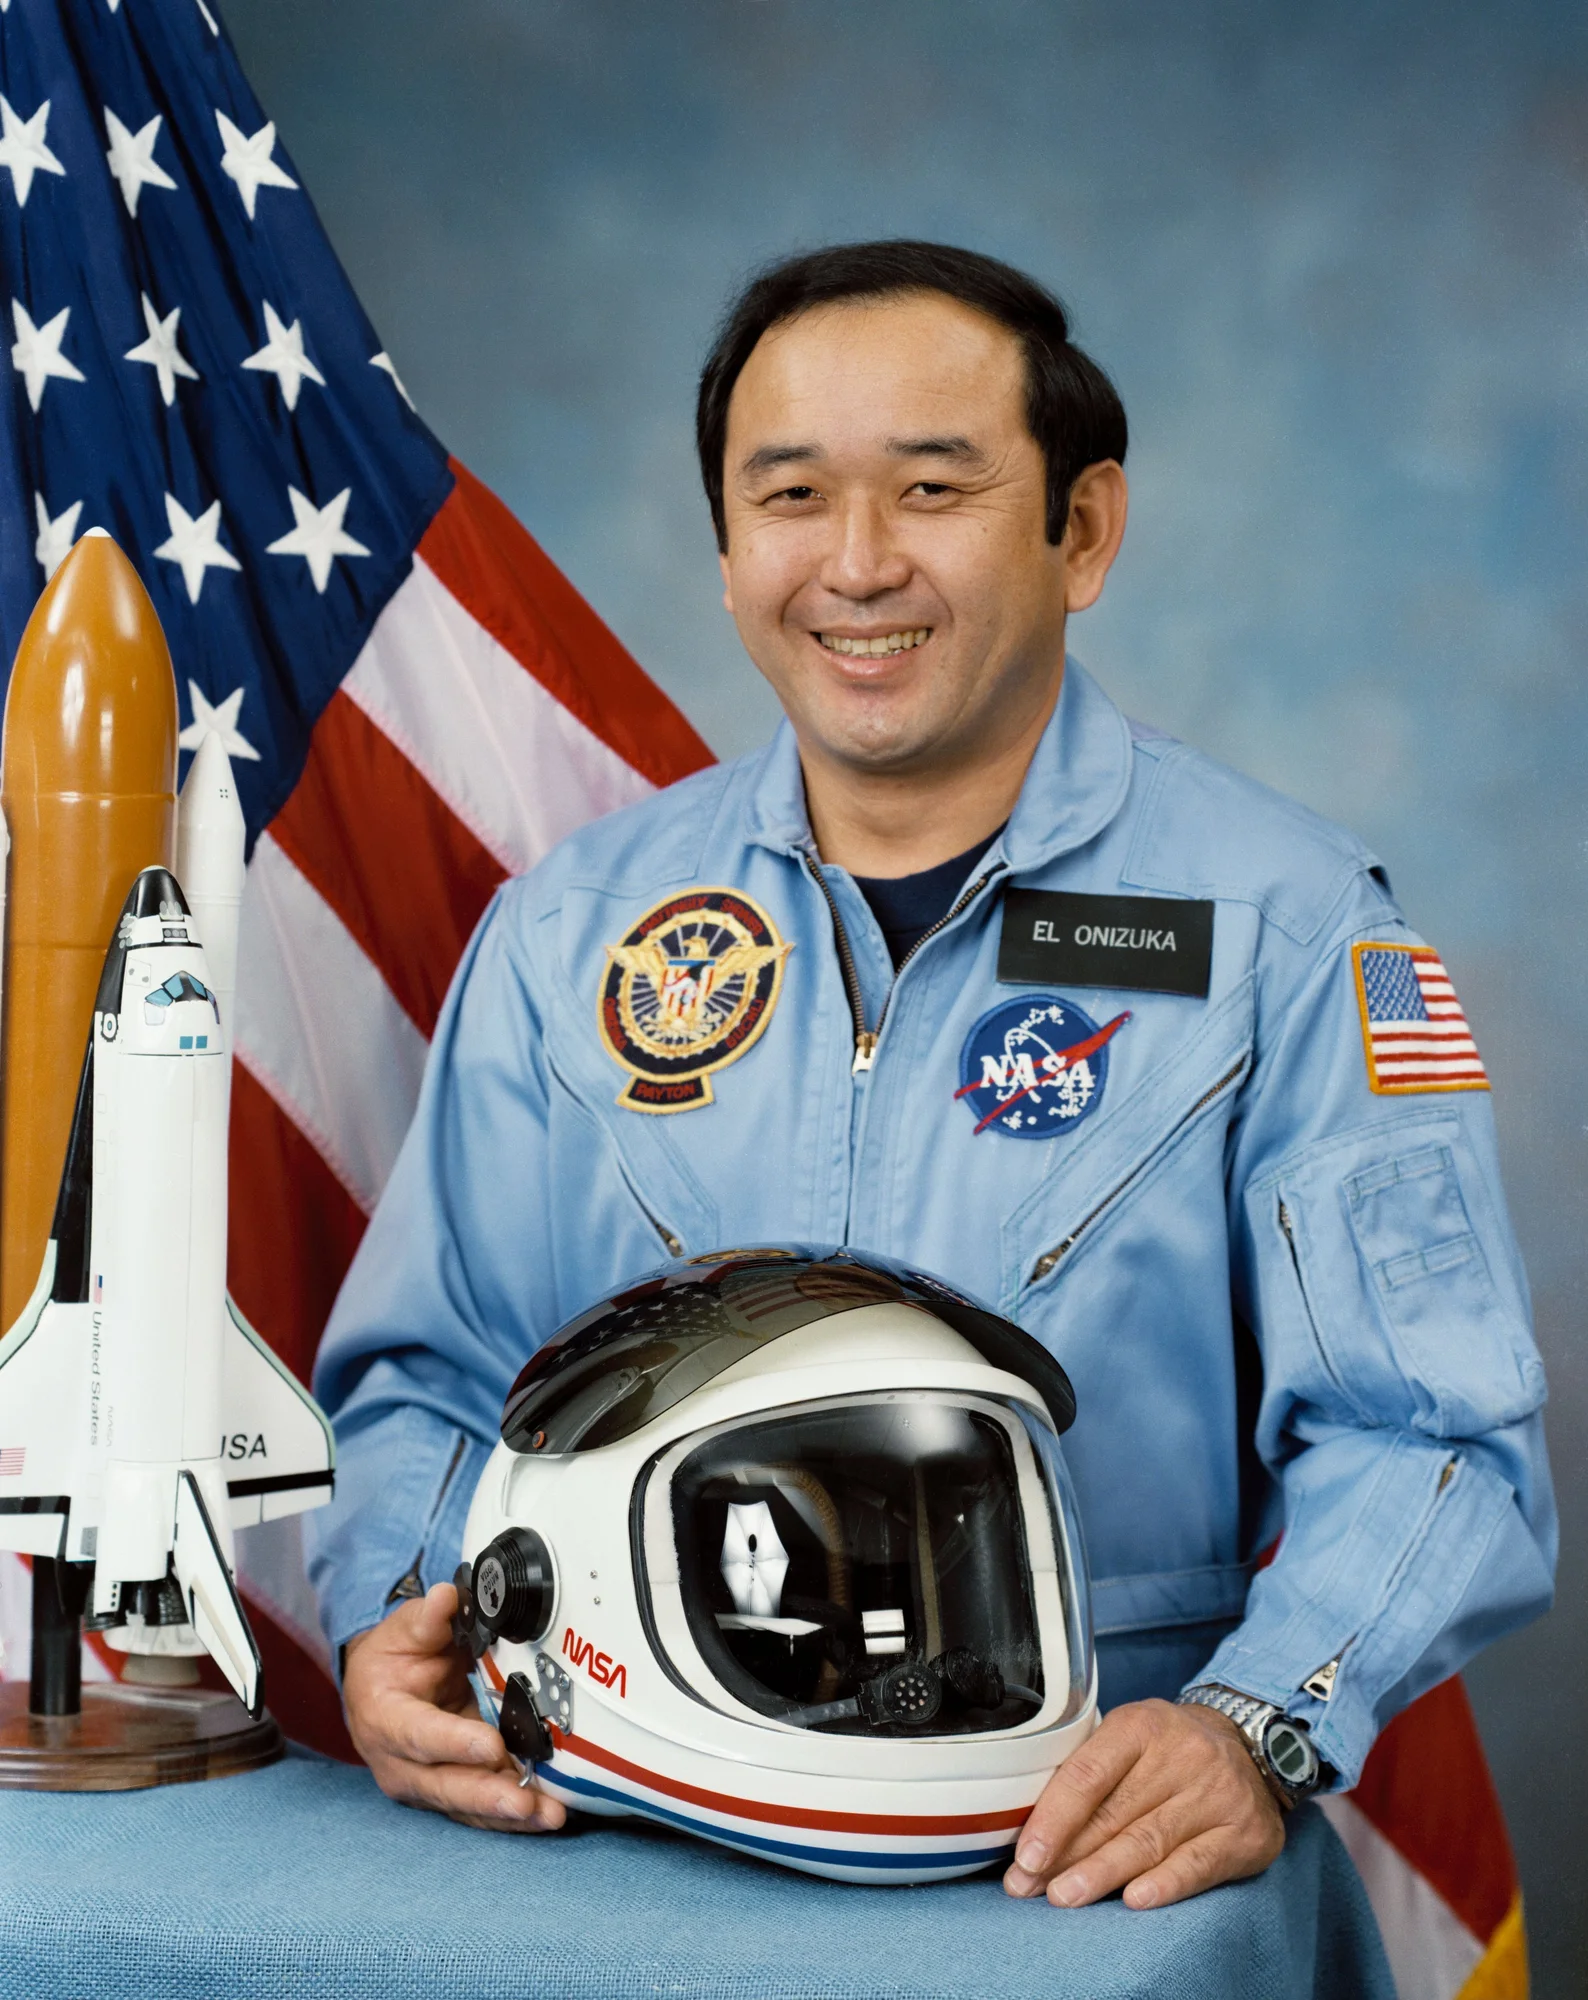 Image shows a portrait of Ellison Onizuka was the first Asian American to fly to space